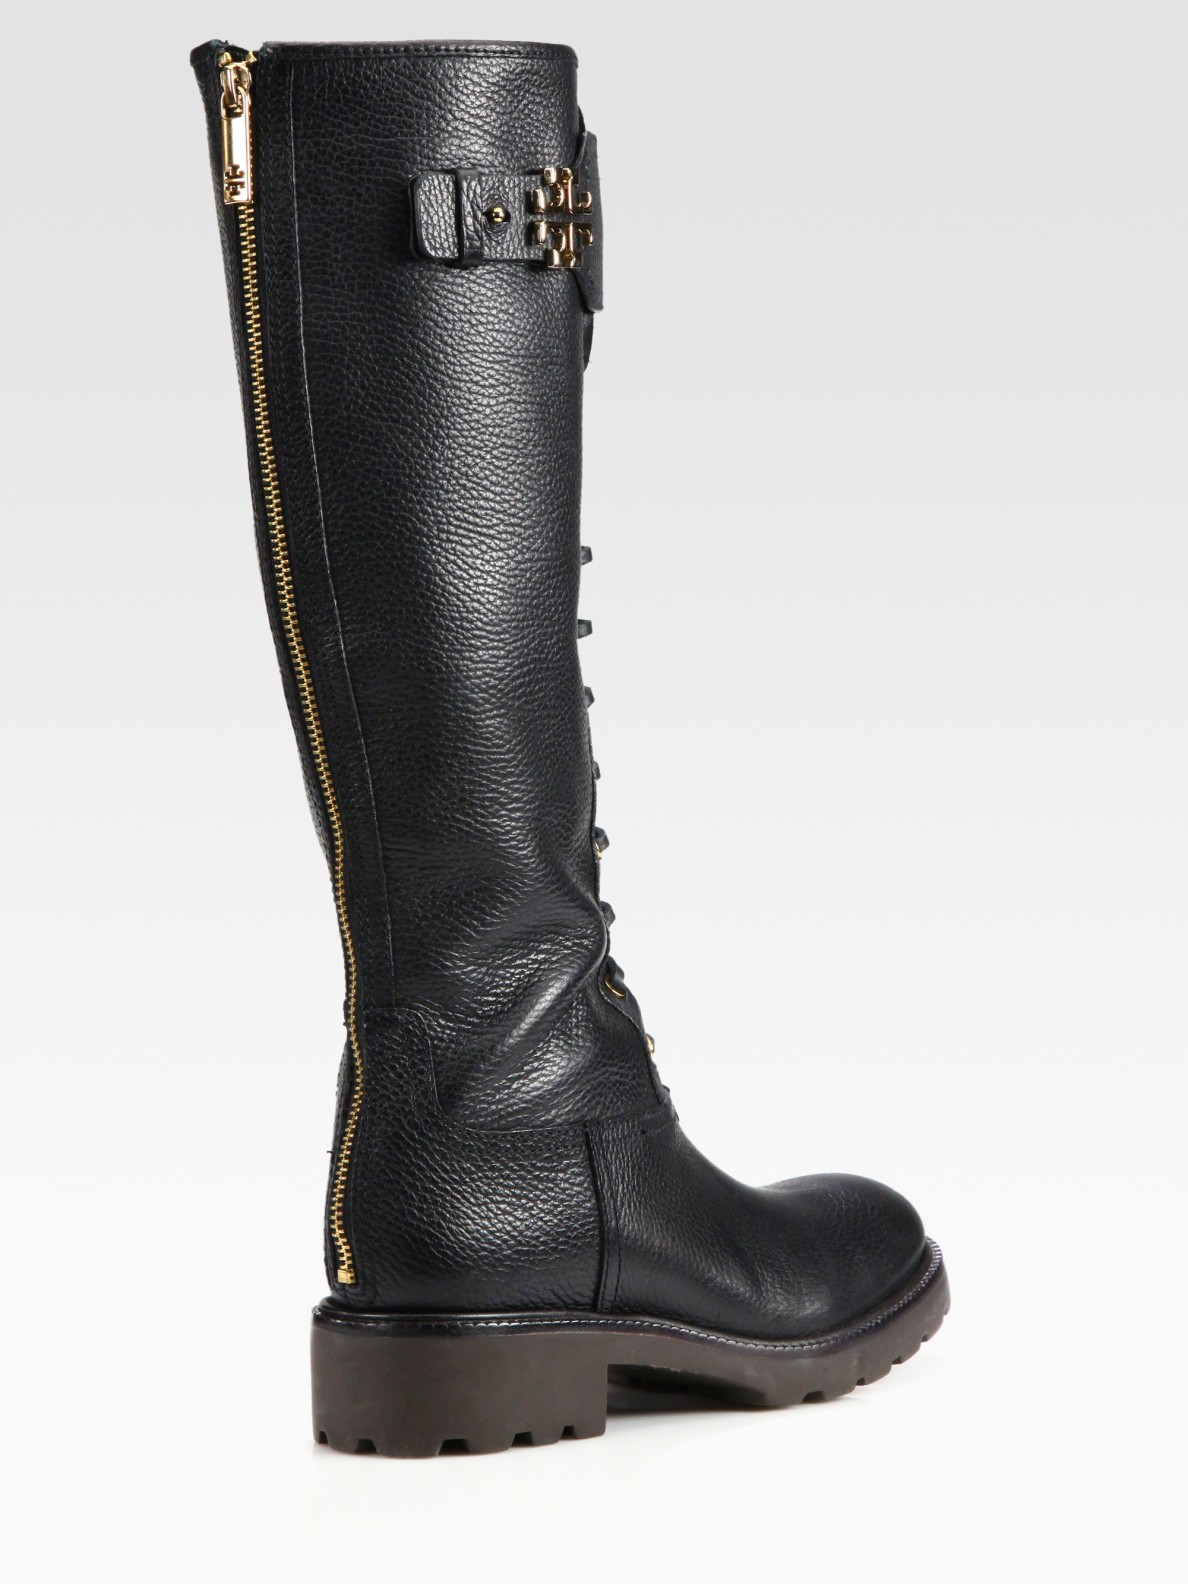 Lyst - Tory burch Wesley Leather Laceup Boots in Black